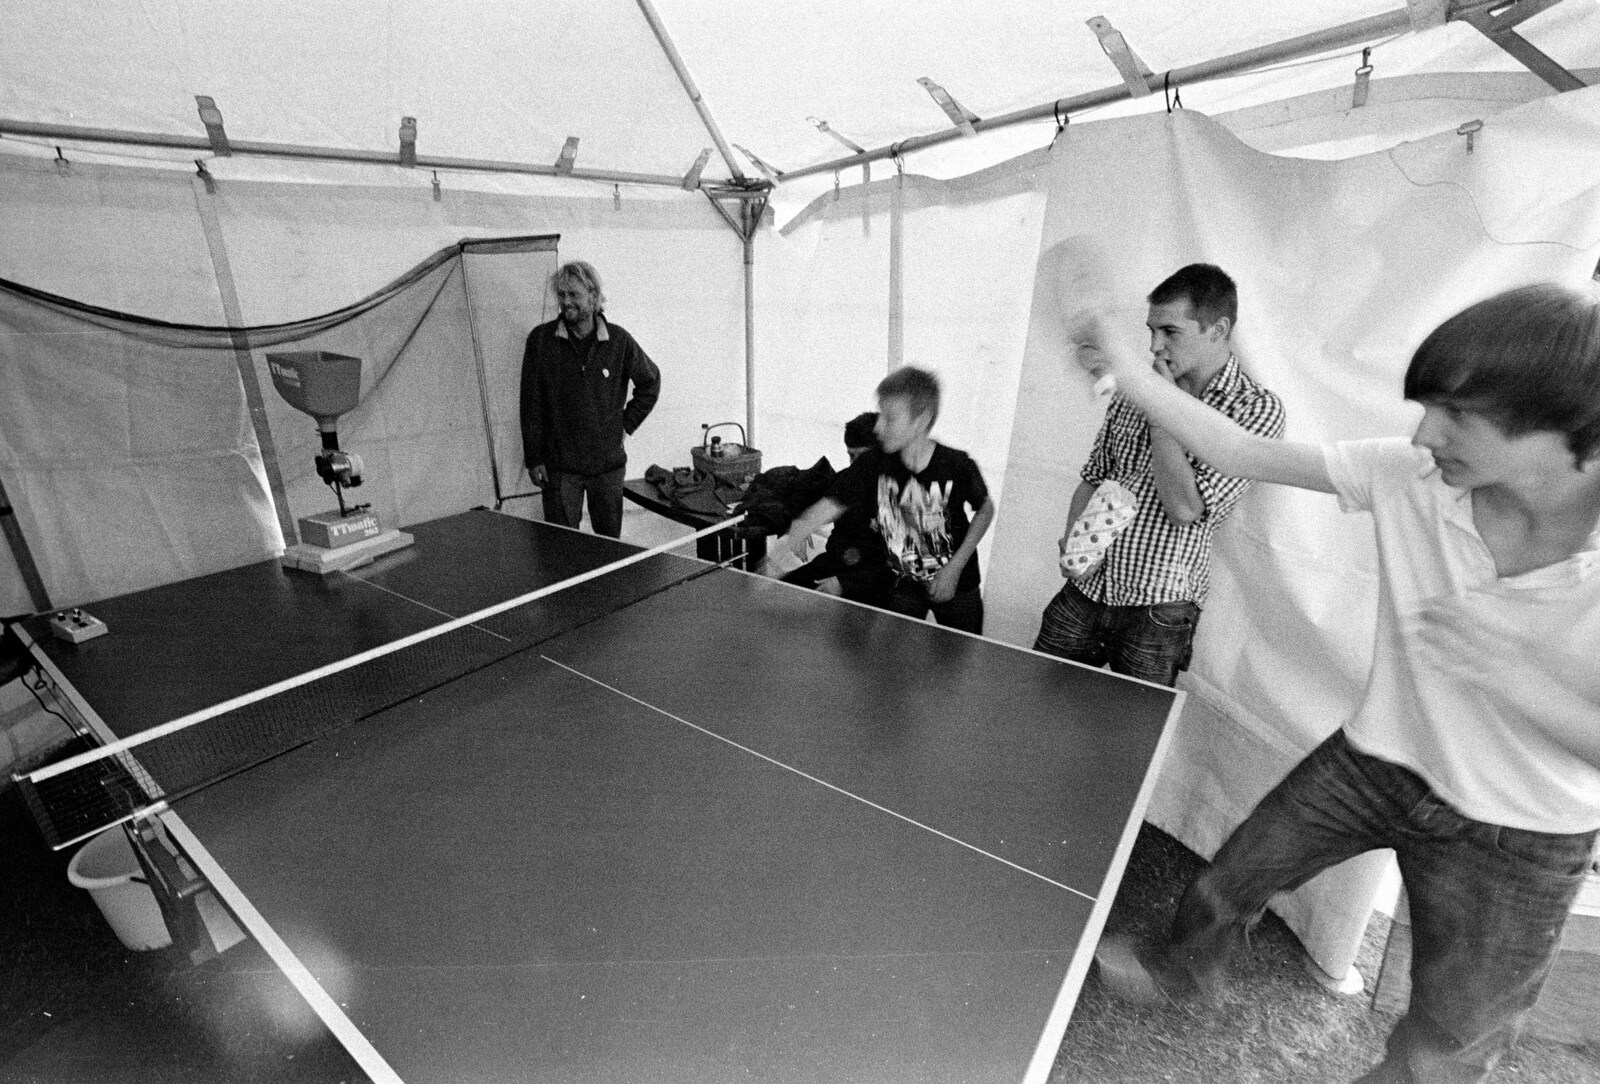 Fred at the Carnival, Brewer's Green Lane, Diss, Norfolk - 21st June 2010: Wavy in the Ping Pong tent